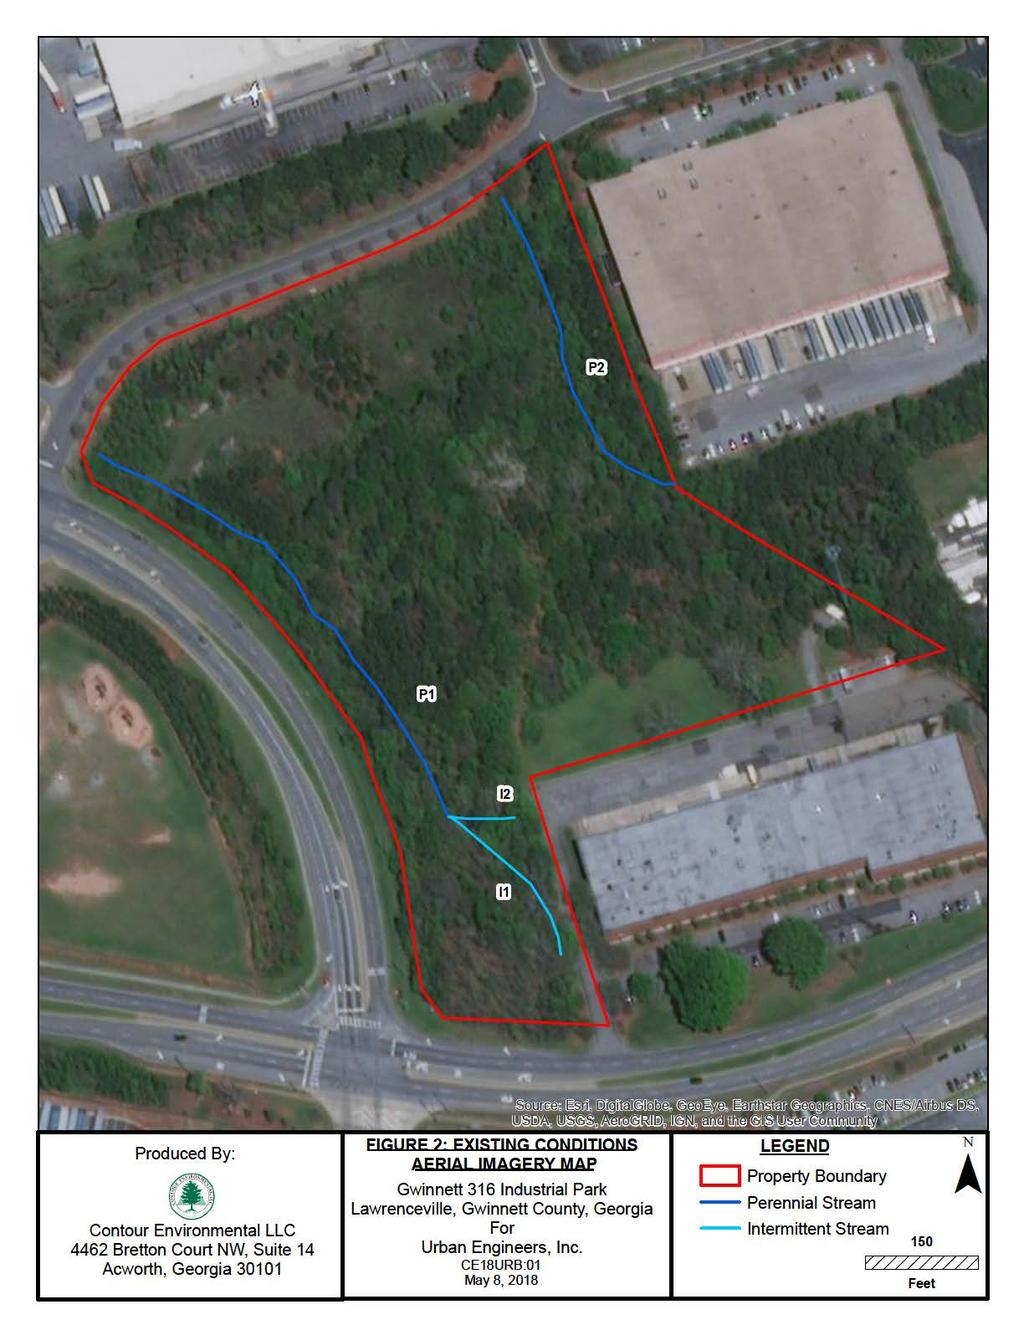 FGURE 2 EXSTNG CONDTONS Produced By: AERAi MAGERY MAP Gwinnett 316 ndustrial Park Lawrenceville, Gwinnett County, Georgia Contour Environmental LLC For 4462 Bretton Court